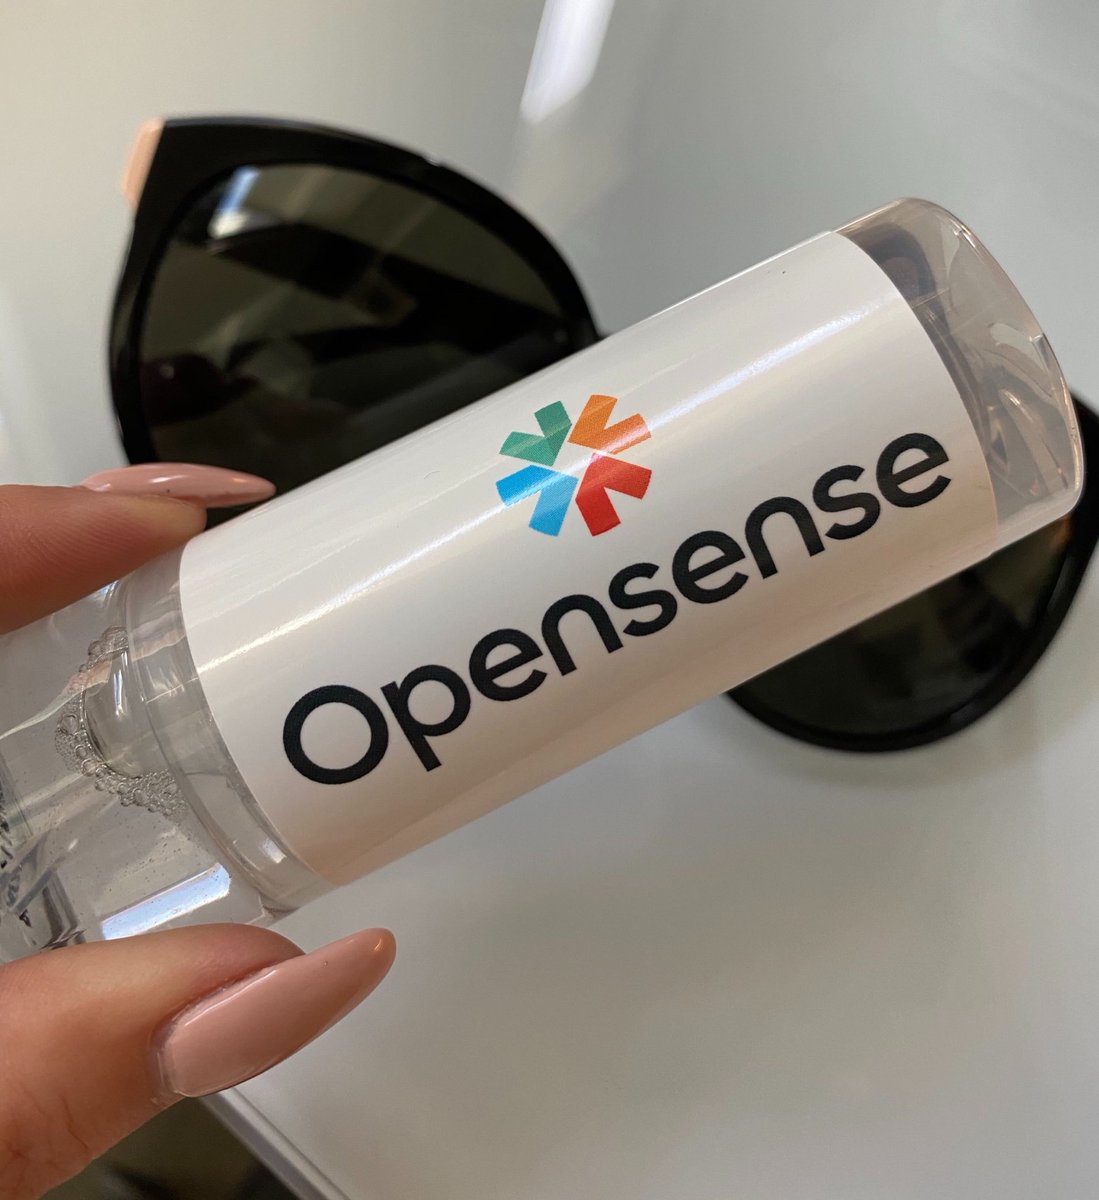 Just cracked open a box of new Opensense swag. Check it out! ✌🏽#BrandedSwag